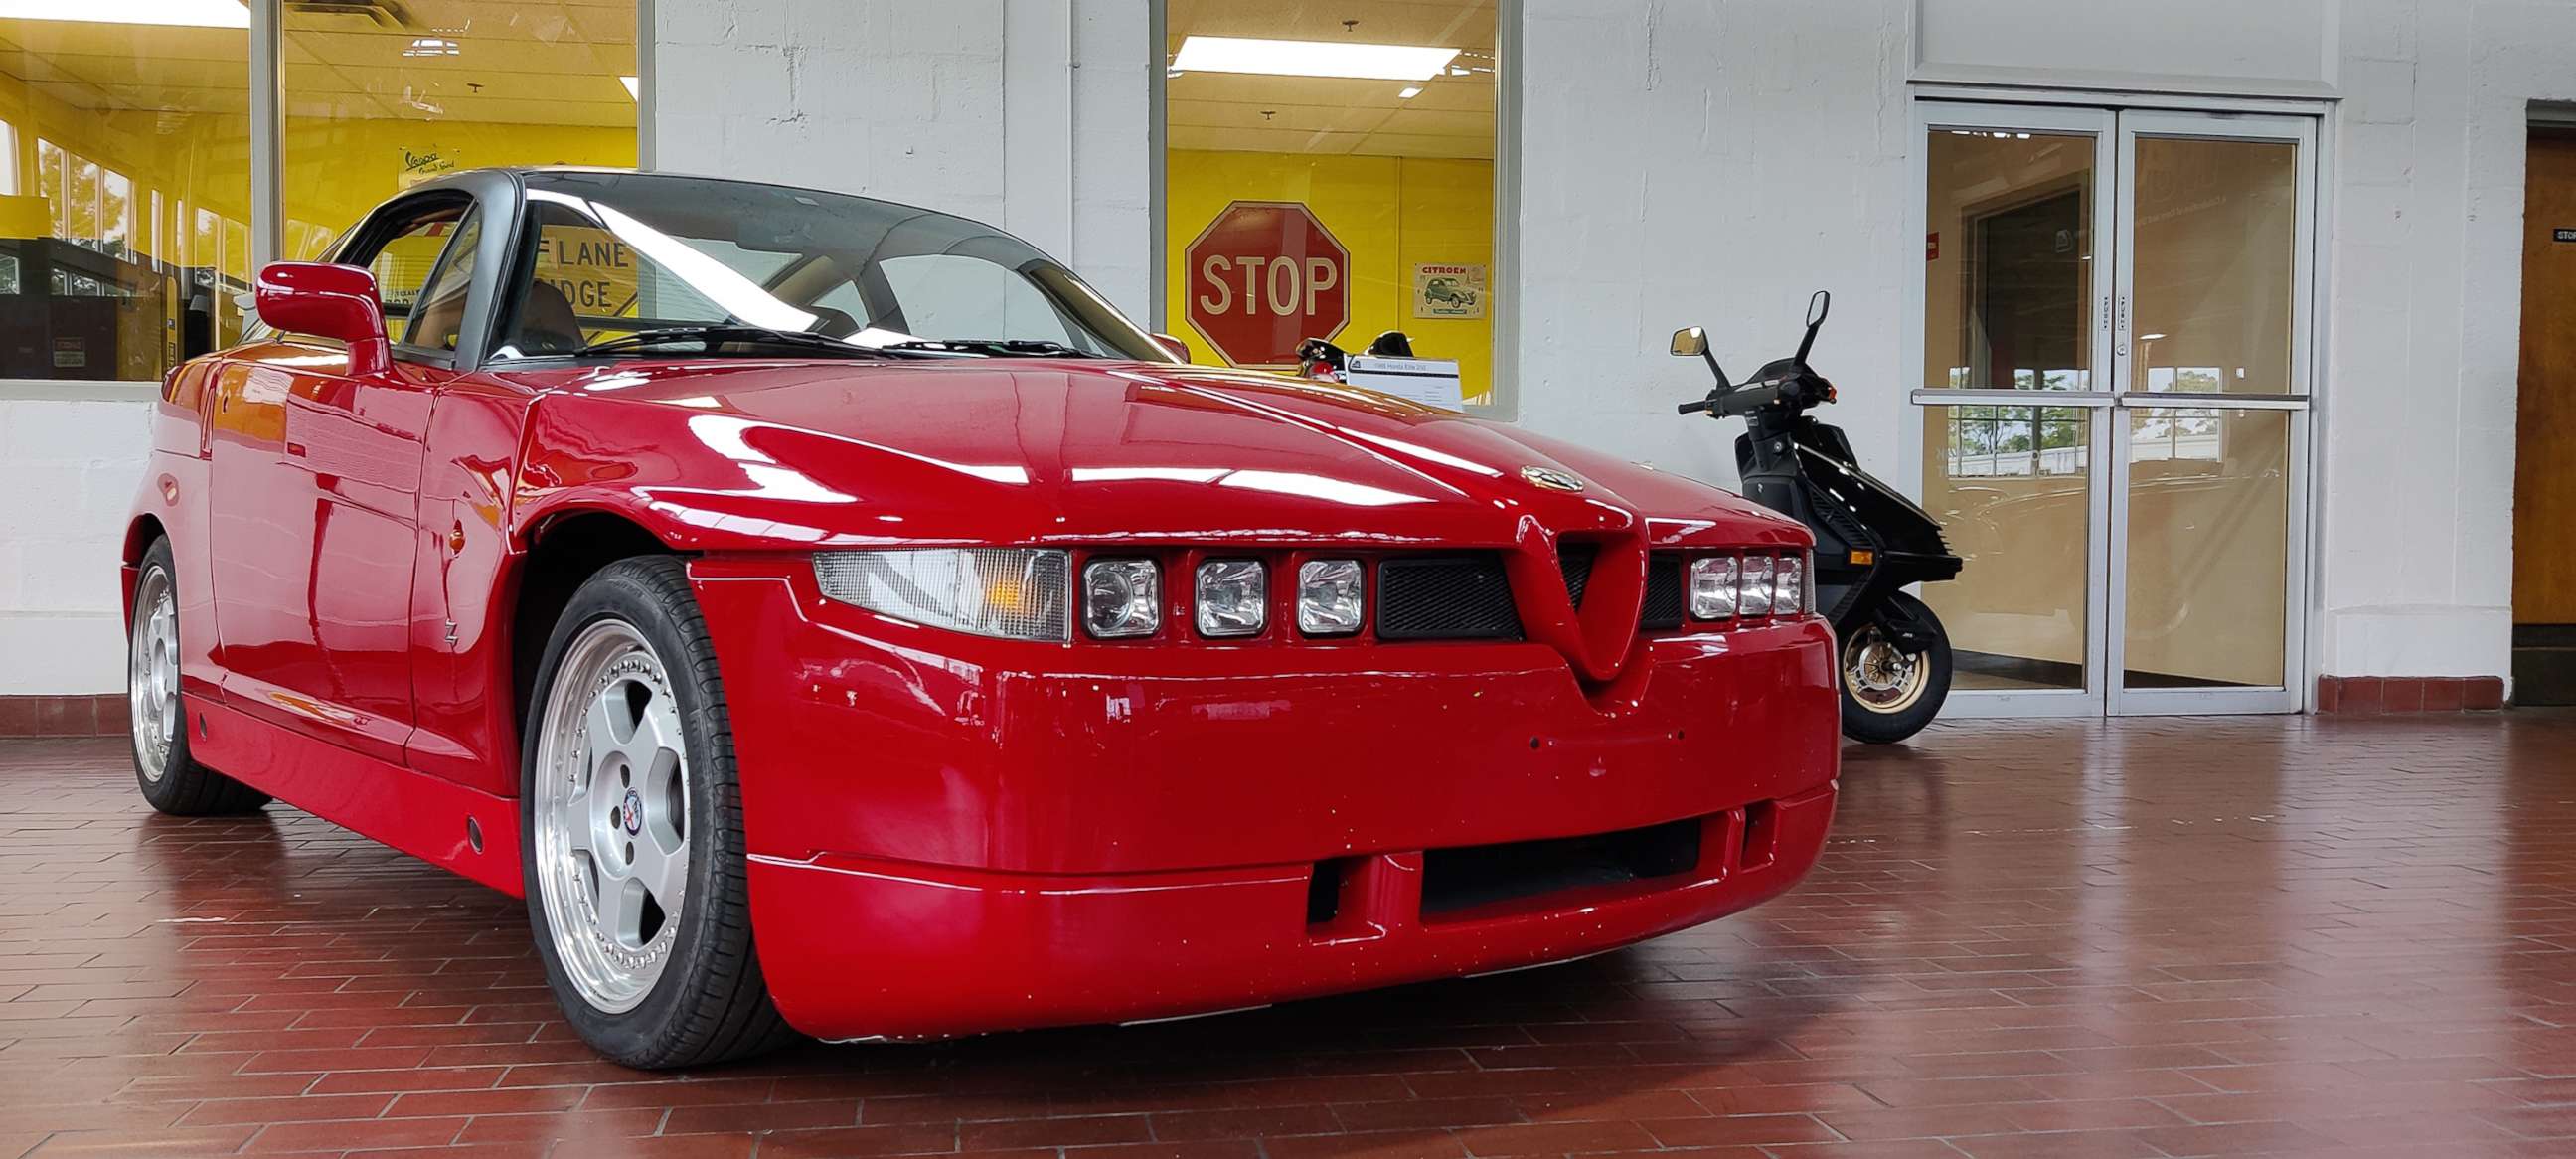 PHOTO: A 1991 Alfa Romeo SZ displayed at the Radwood exhibit at the Lane Motor Museum in Nashville, Ky., August 2021.